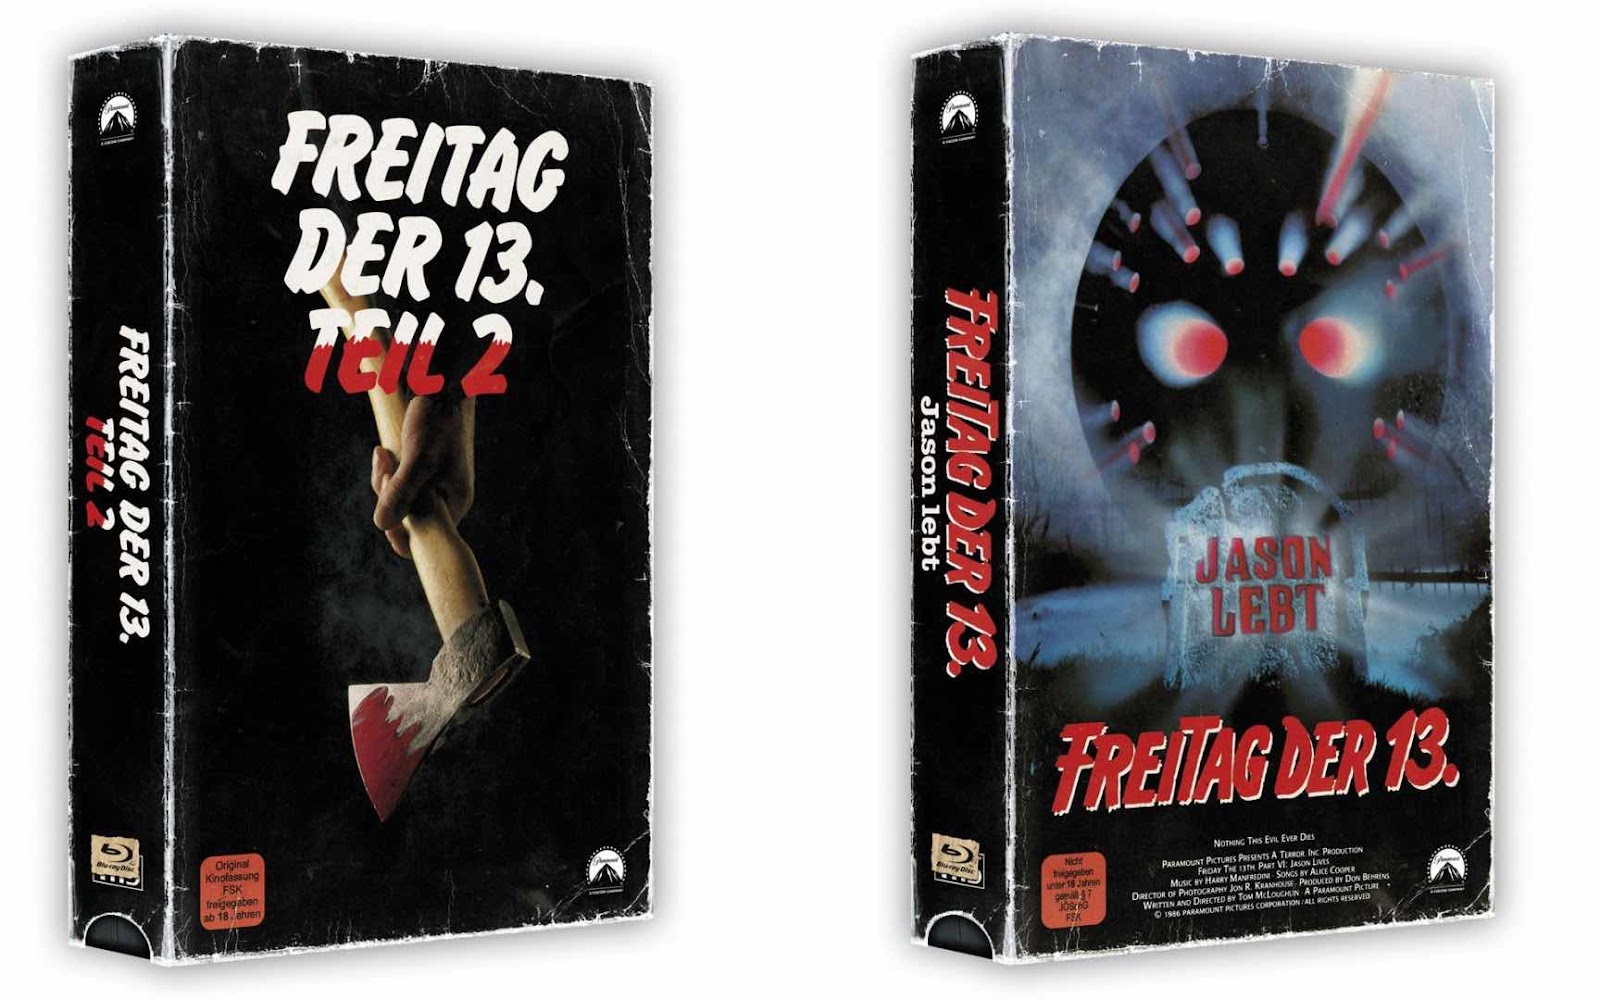  Retro Friday The 13th VHS Cover Blu-Rays Coming Soon From ‘84 Entertainment